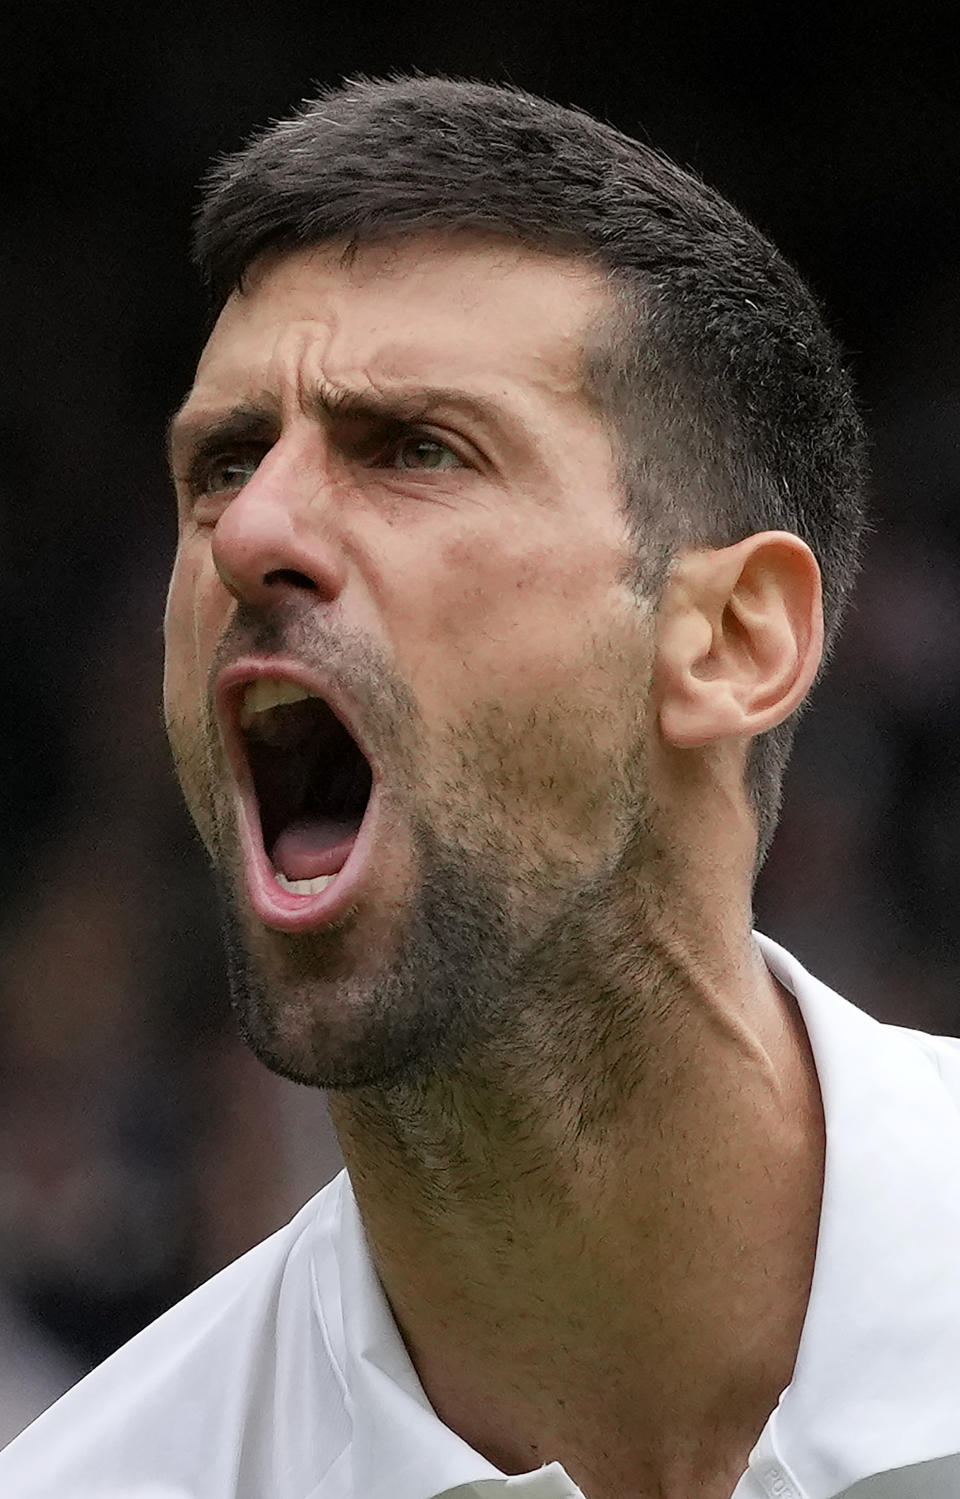 Serbia's Novak Djokovic celebrates winning a point against Russia's Andrey Rublev in a men's singles match on day nine of the Wimbledon tennis championships in London, Tuesday, July 11, 2023. (AP Photo/Kirsty Wigglesworth)